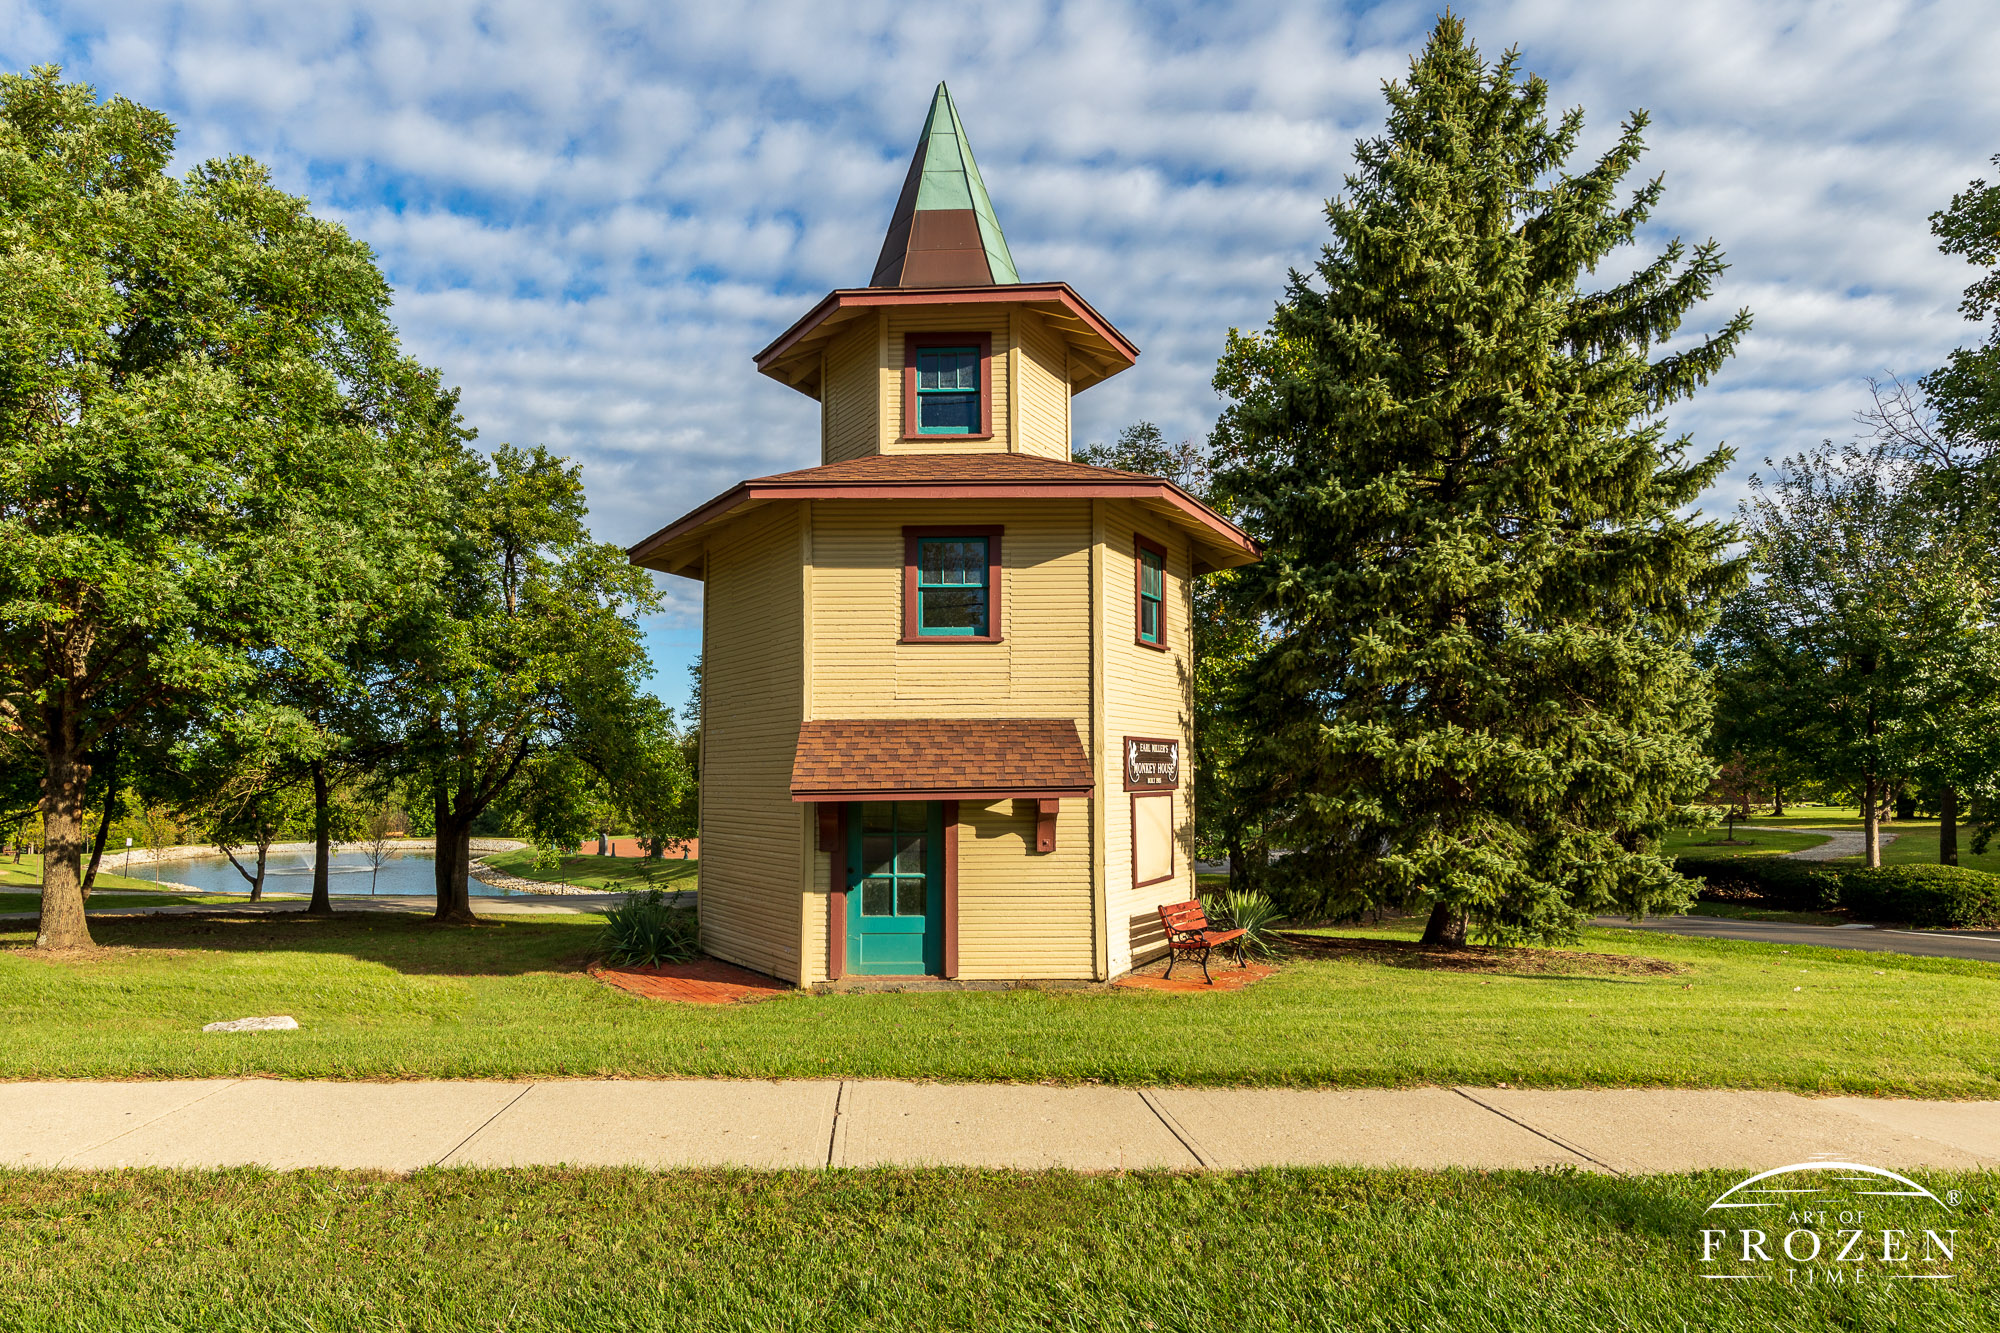 This whimsical structure at the entrance of Stubbs Park in Centerville Ohio basks in the morning light